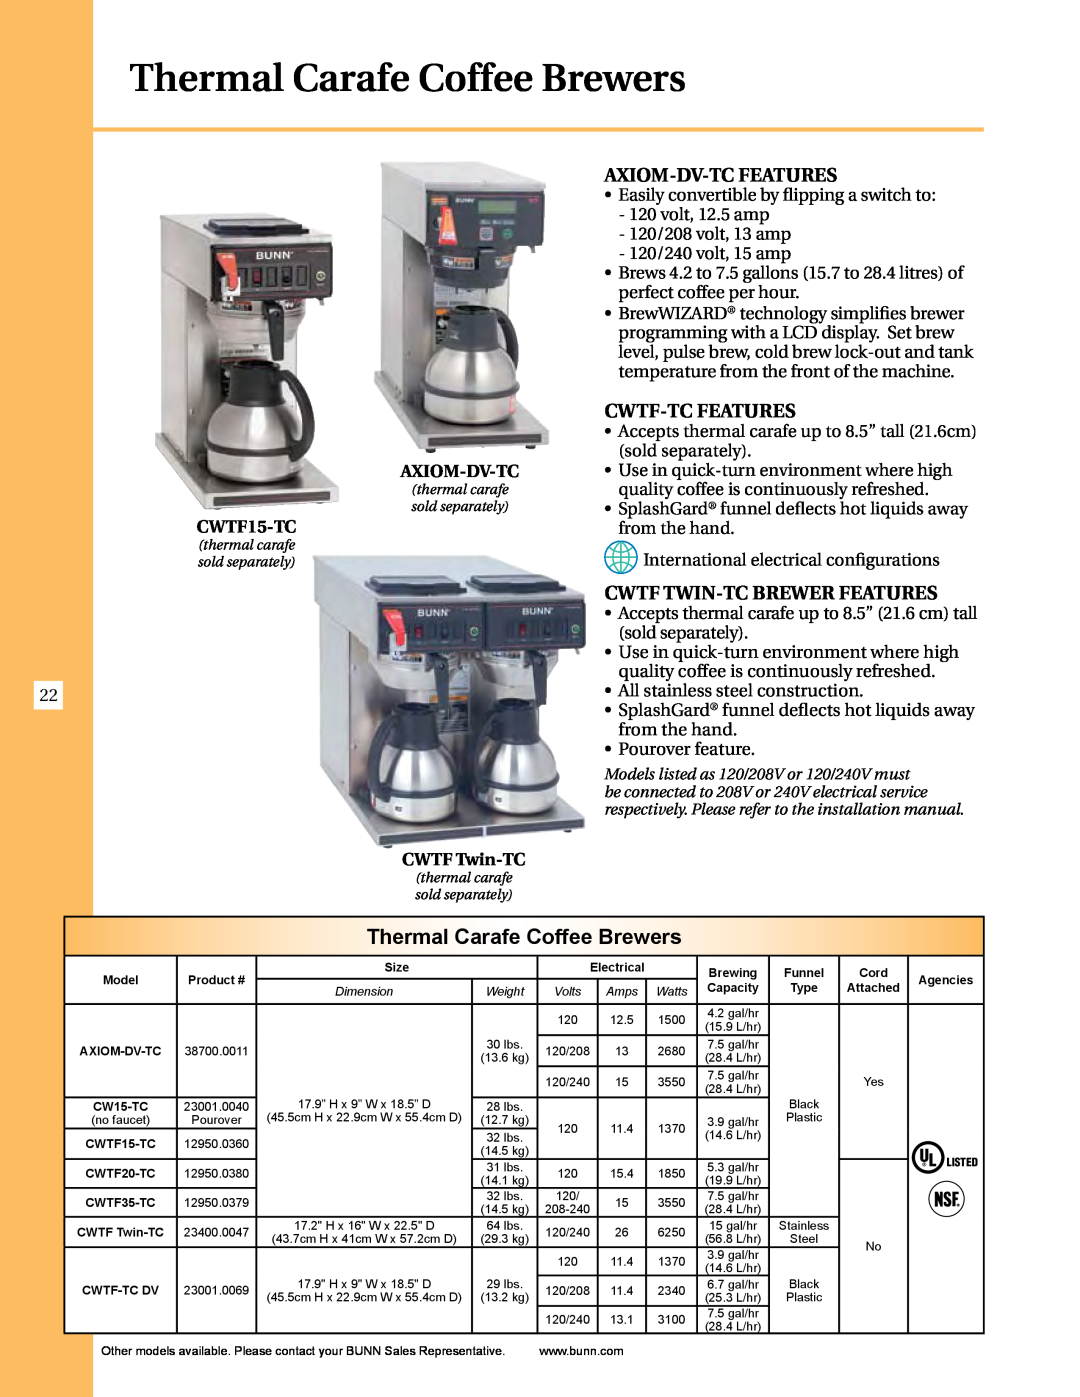 Thermal Comfort ICB-TWIN Thermal Carafe Coffee Brewers, AXIOM-DV-TC Features, CWTF-TC Features, CWTF15-TC, Axiom-Dv-Tc 